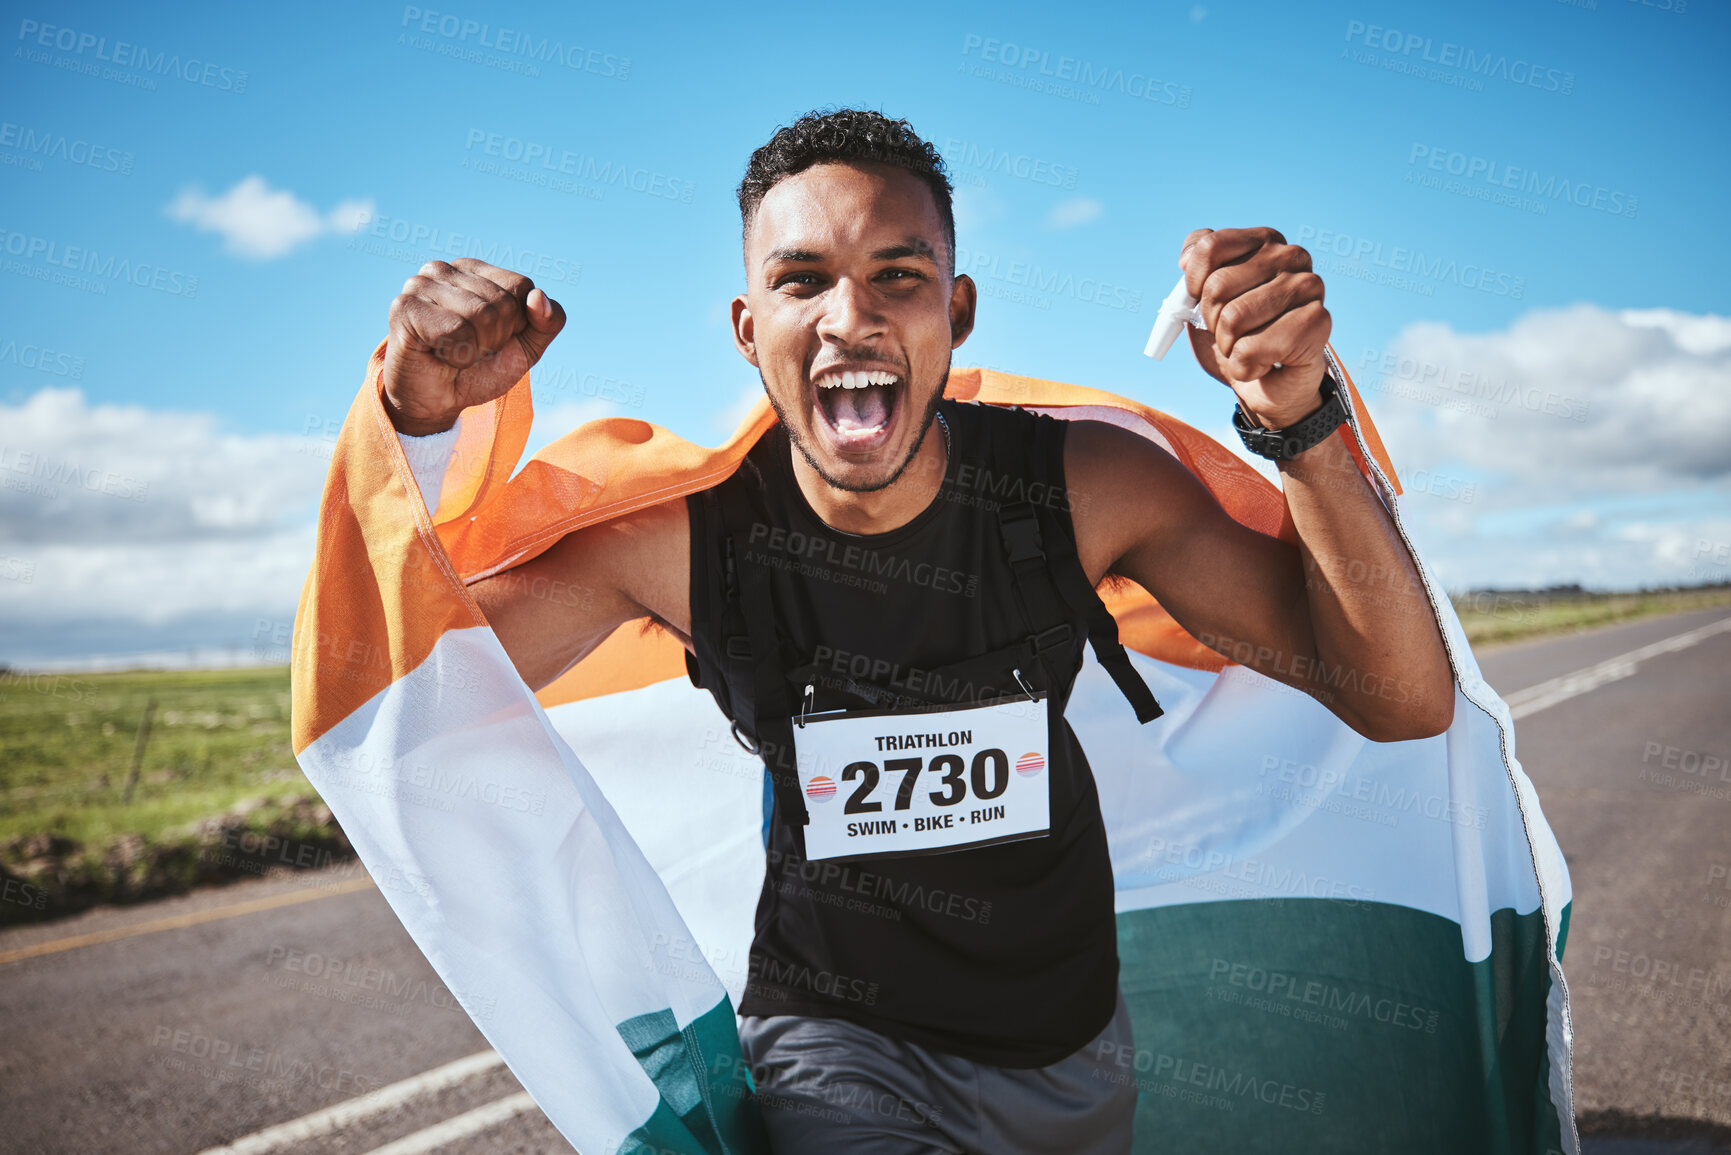 Buy stock photo Portrait, fitness and flag of India with a man runner on a street in nature for motivation or success. Sports, winner and health with a male athlete cheering during cardio or endurance training